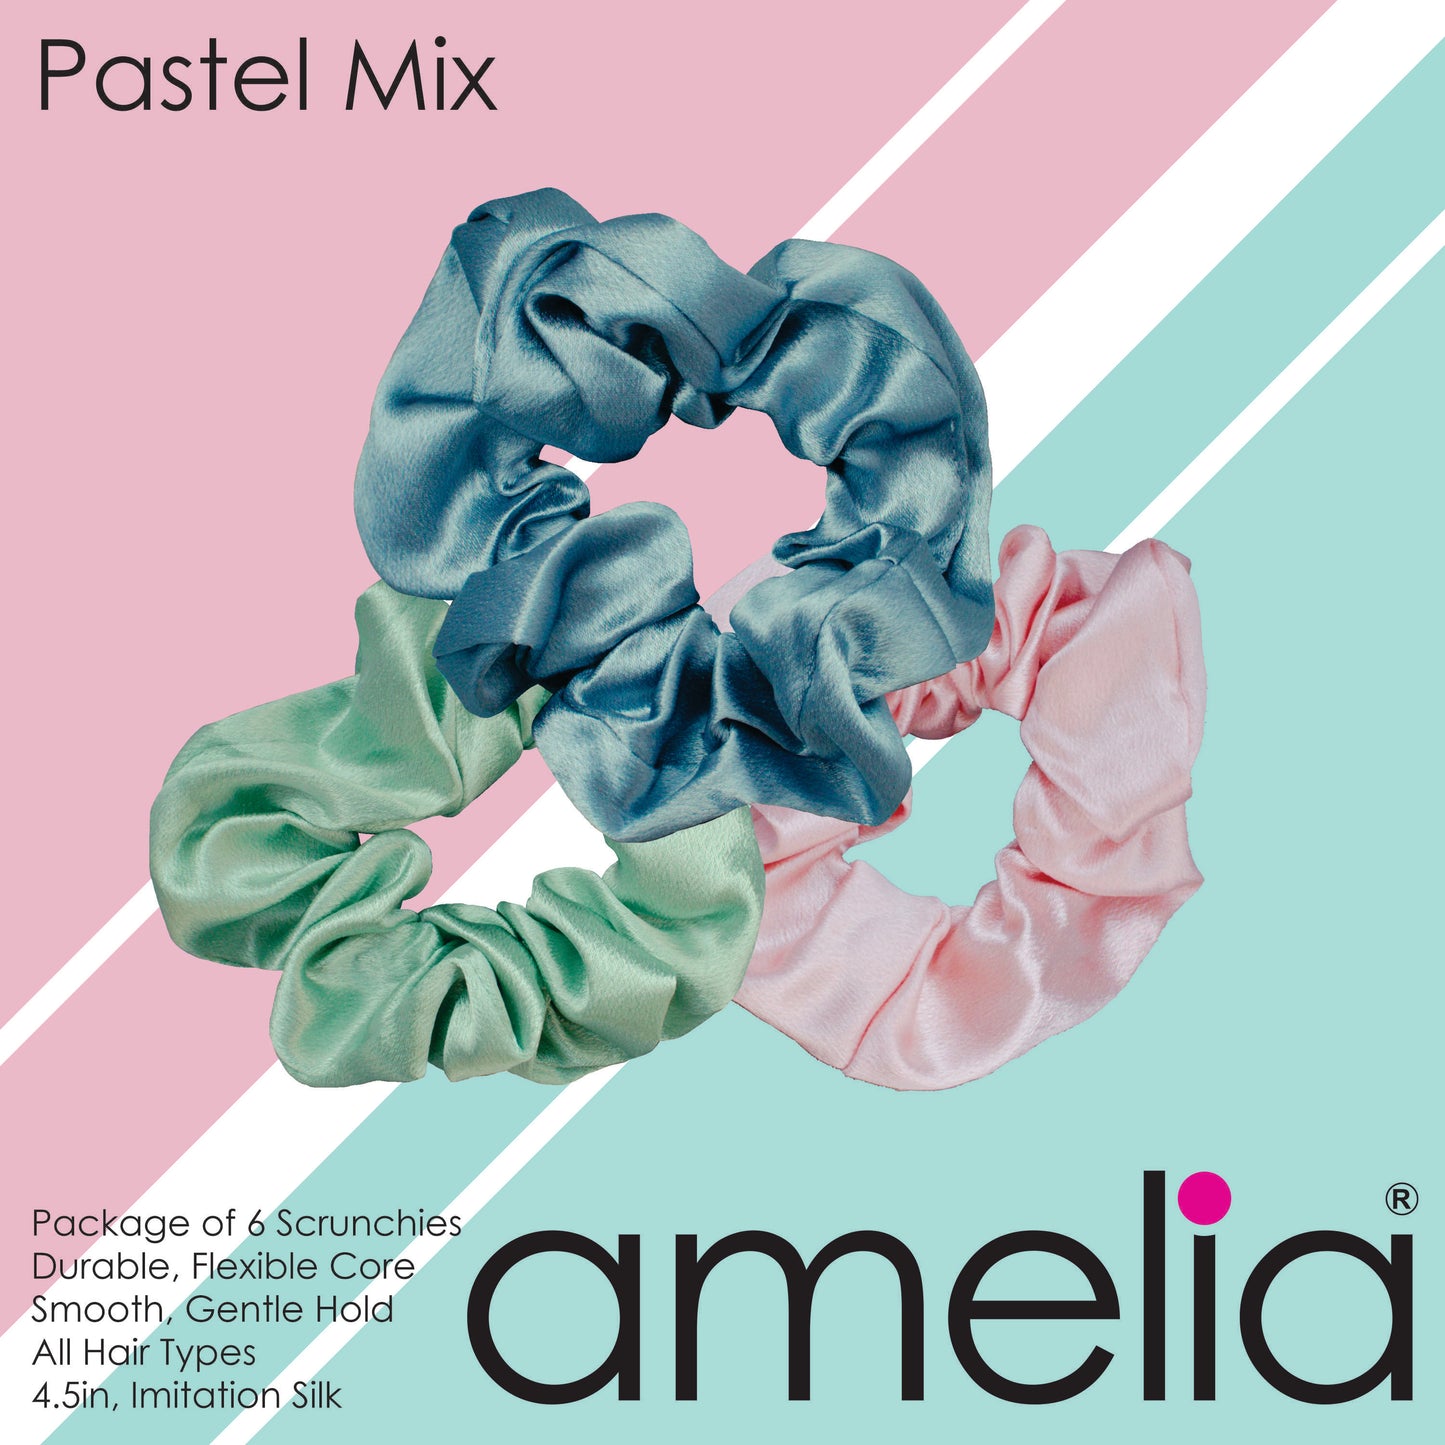 Amelia Beauty, Pastel Mix Imitation Silk Scrunchies, 4.5in Diameter, Gentle on Hair, Strong Hold, No Snag, No Dents or Creases. 6 Pack